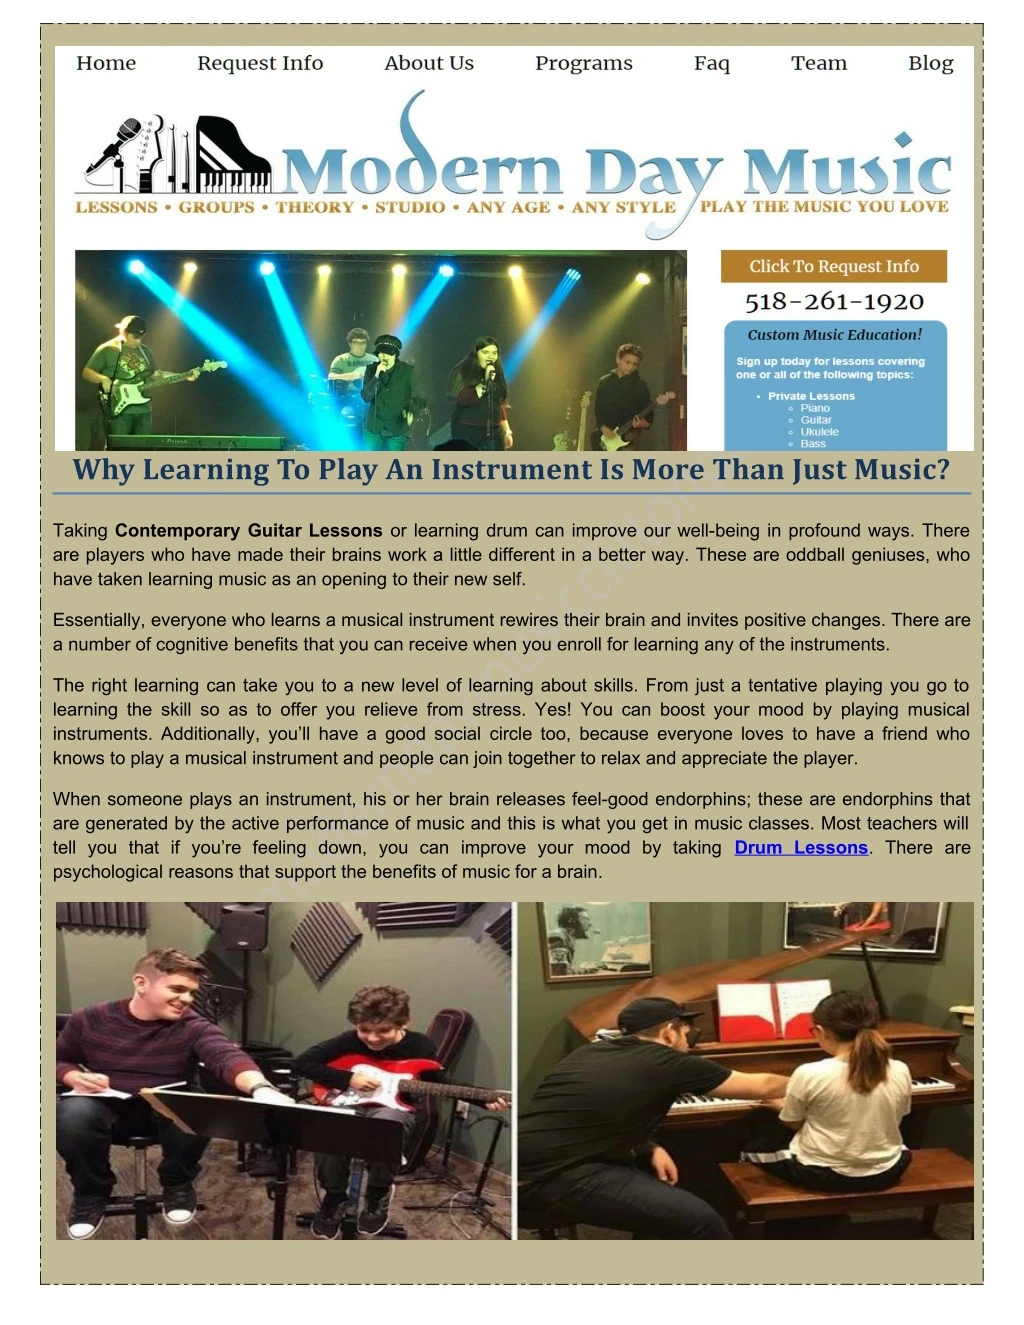 why learning to play an instrument is more than